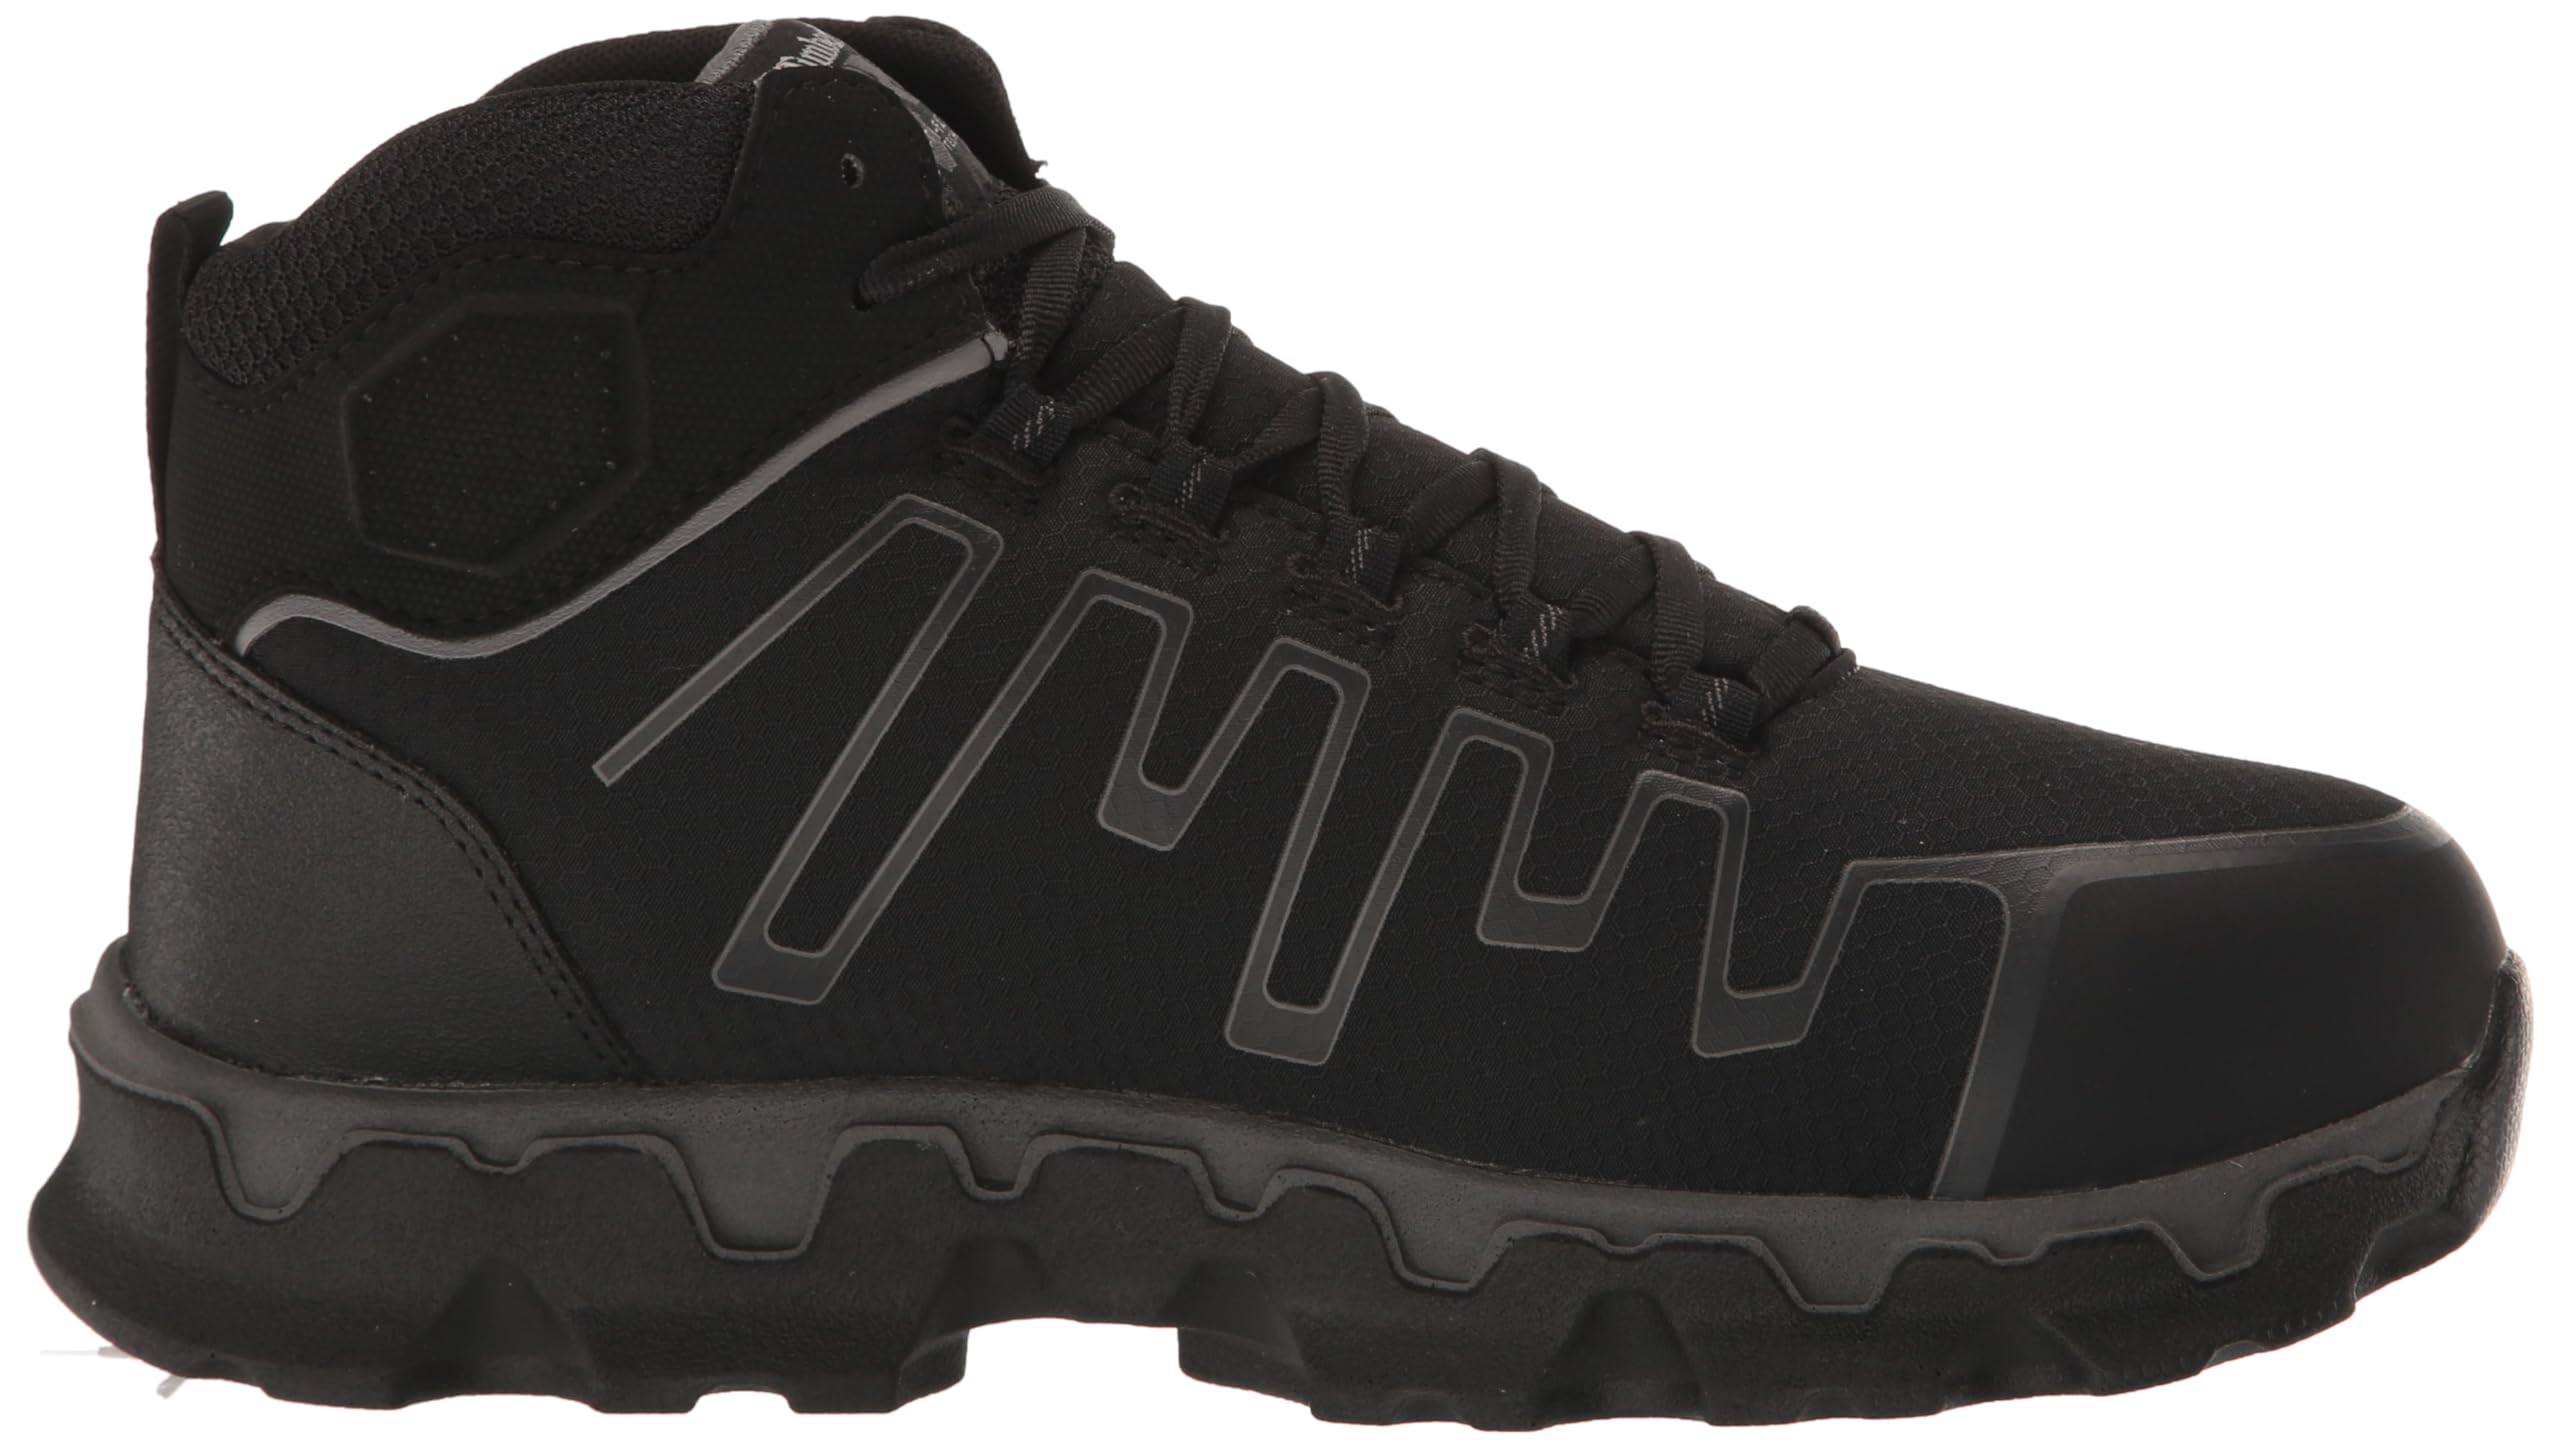 Timberland PRO Men's Powertrain Sport Mid Alloy Safety Toe Athletic Industrial Work Shoe